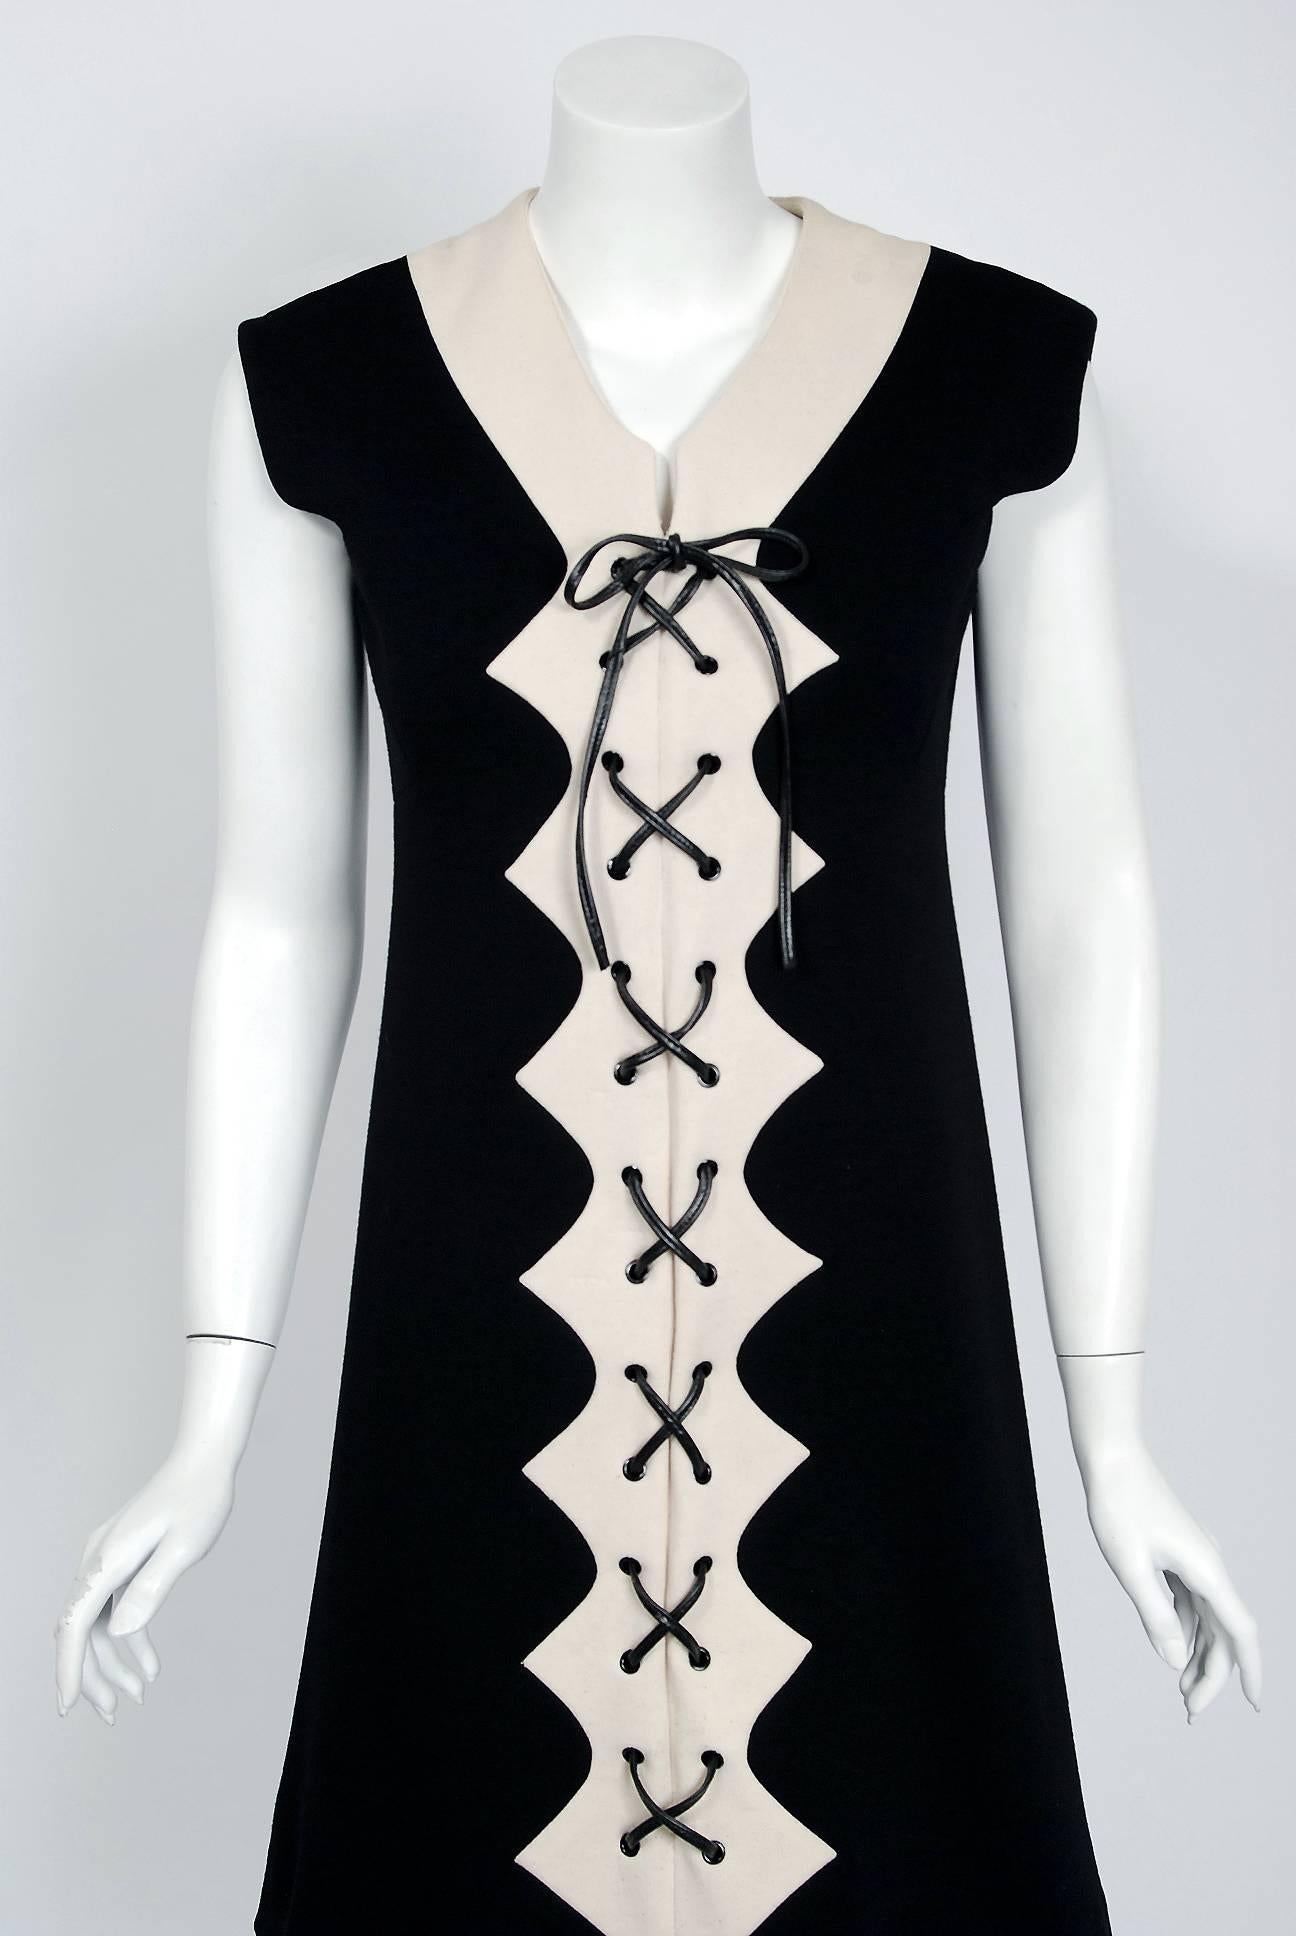 Spectacular Pierre Cardin black and white block-color wool dress from his 1968 collection. In 1951 Cardin opened his own couture house and by 1957, he started a ready-to-wear line; a bold move for a French couturier at the time. The look most